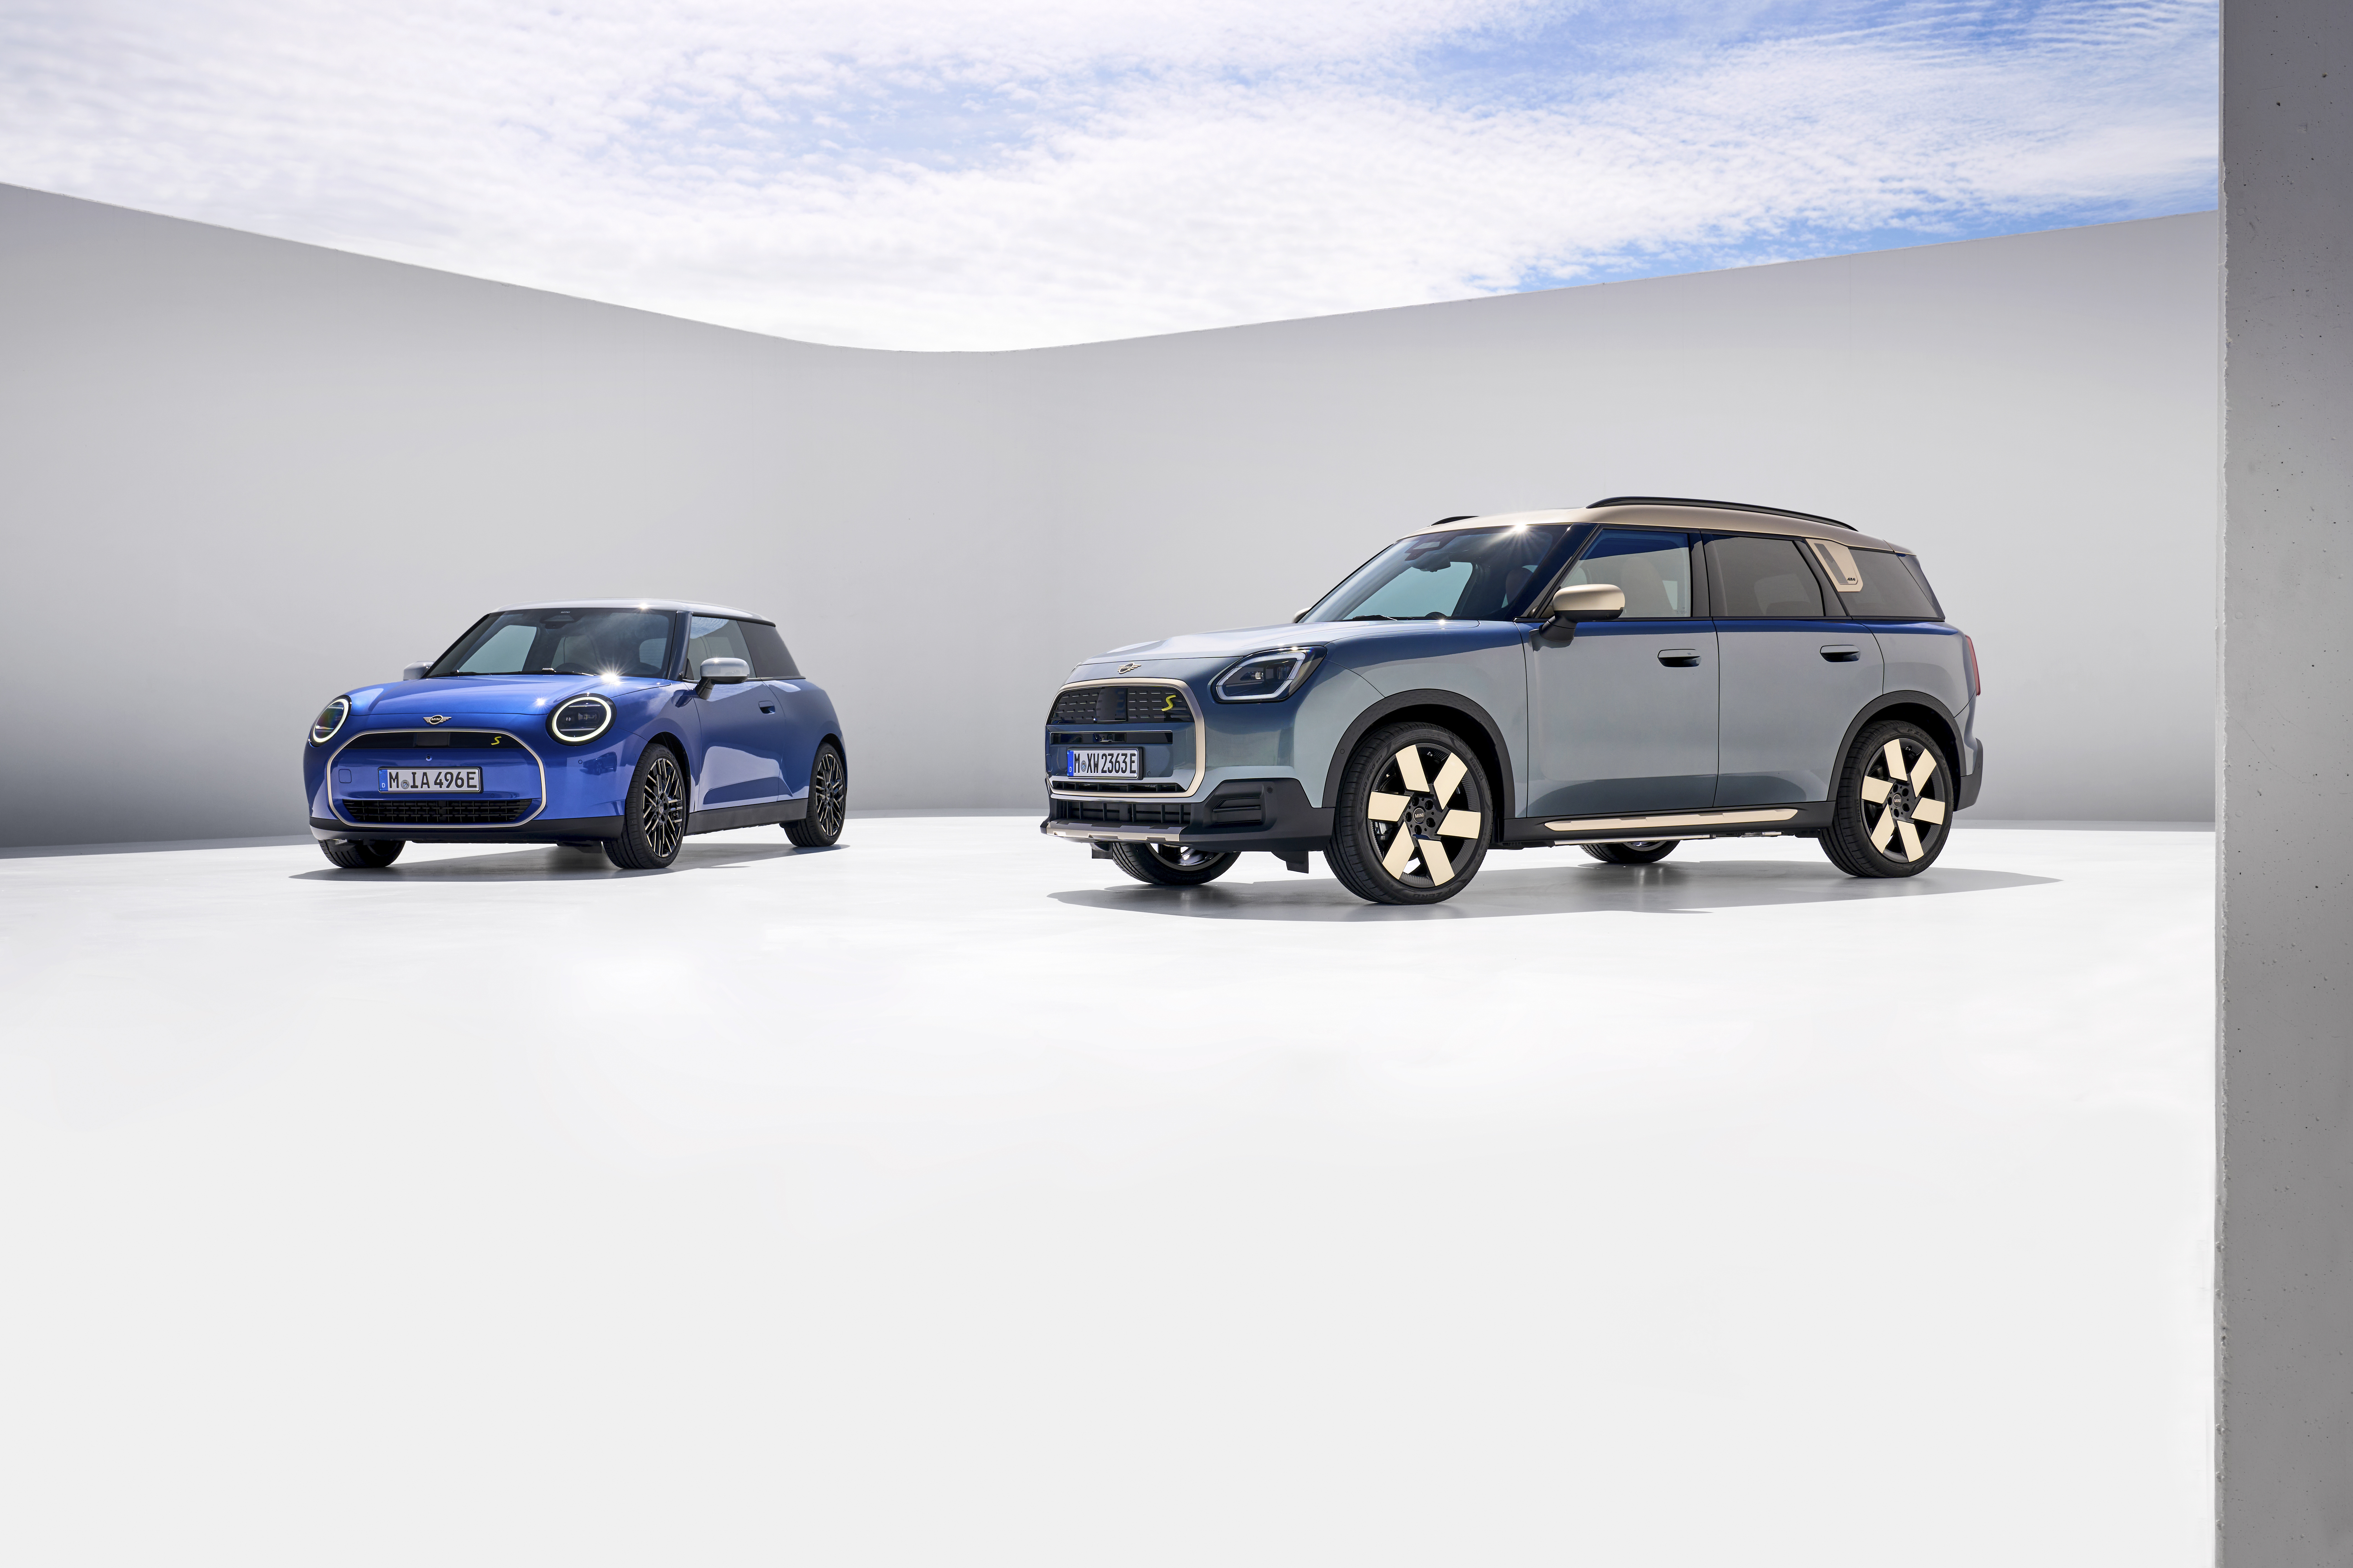 New Cooper and Countryman keep Mini charged